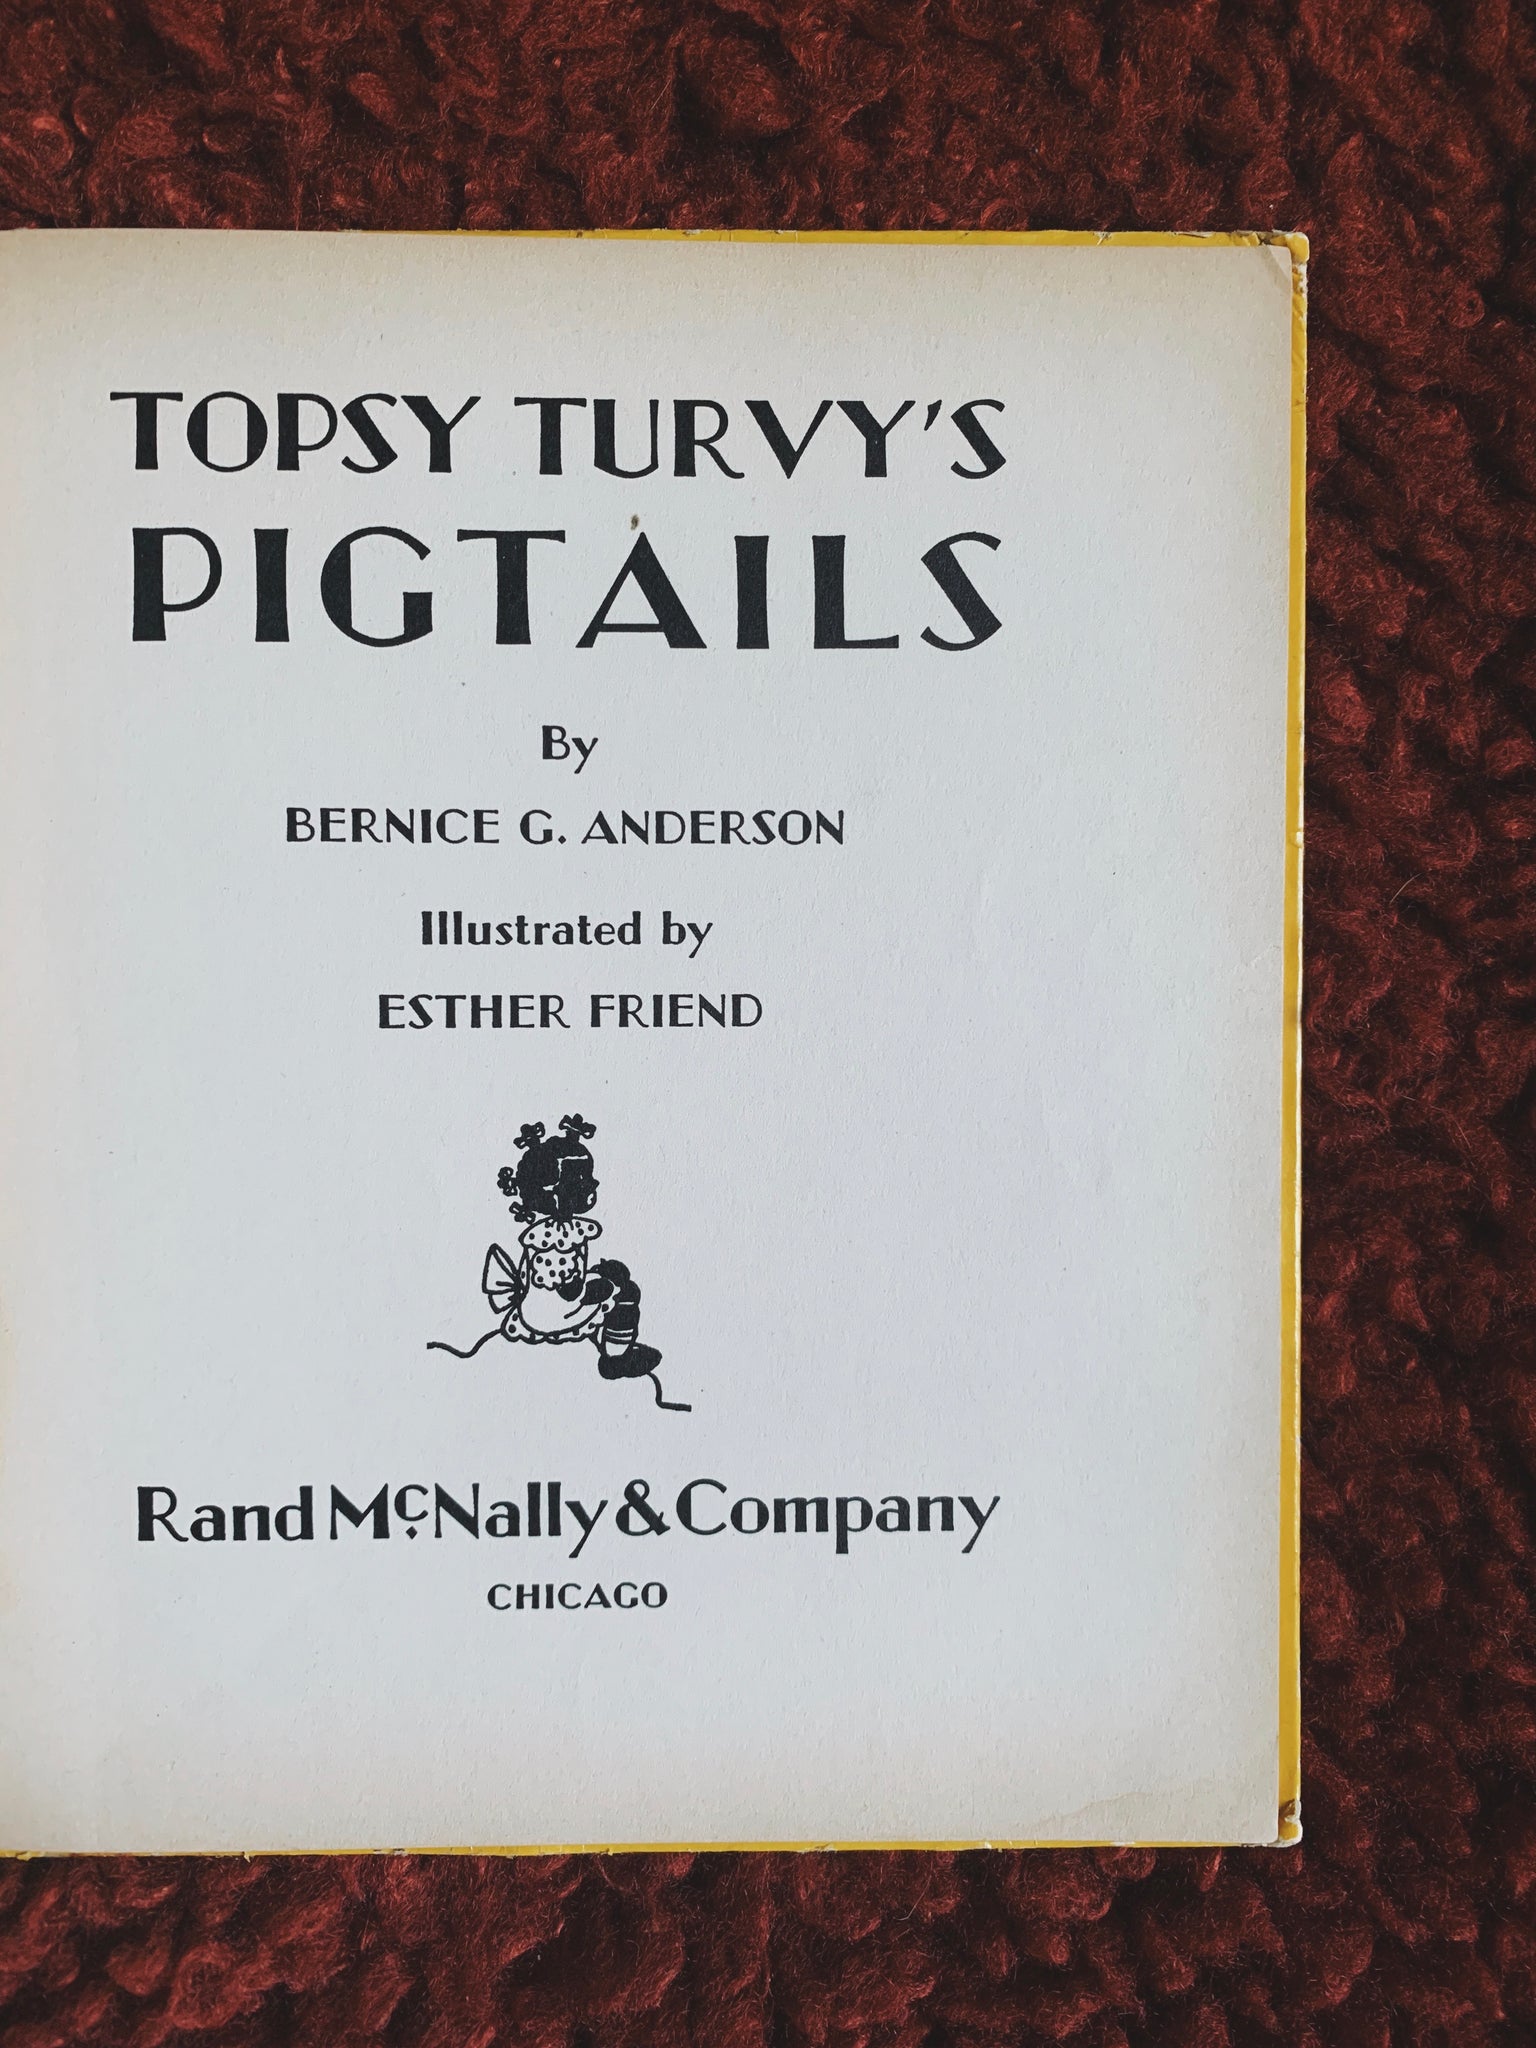 Vintage Hardcover "Topsy Turvy’s Pigtails" by Bernice Anderson (1938)